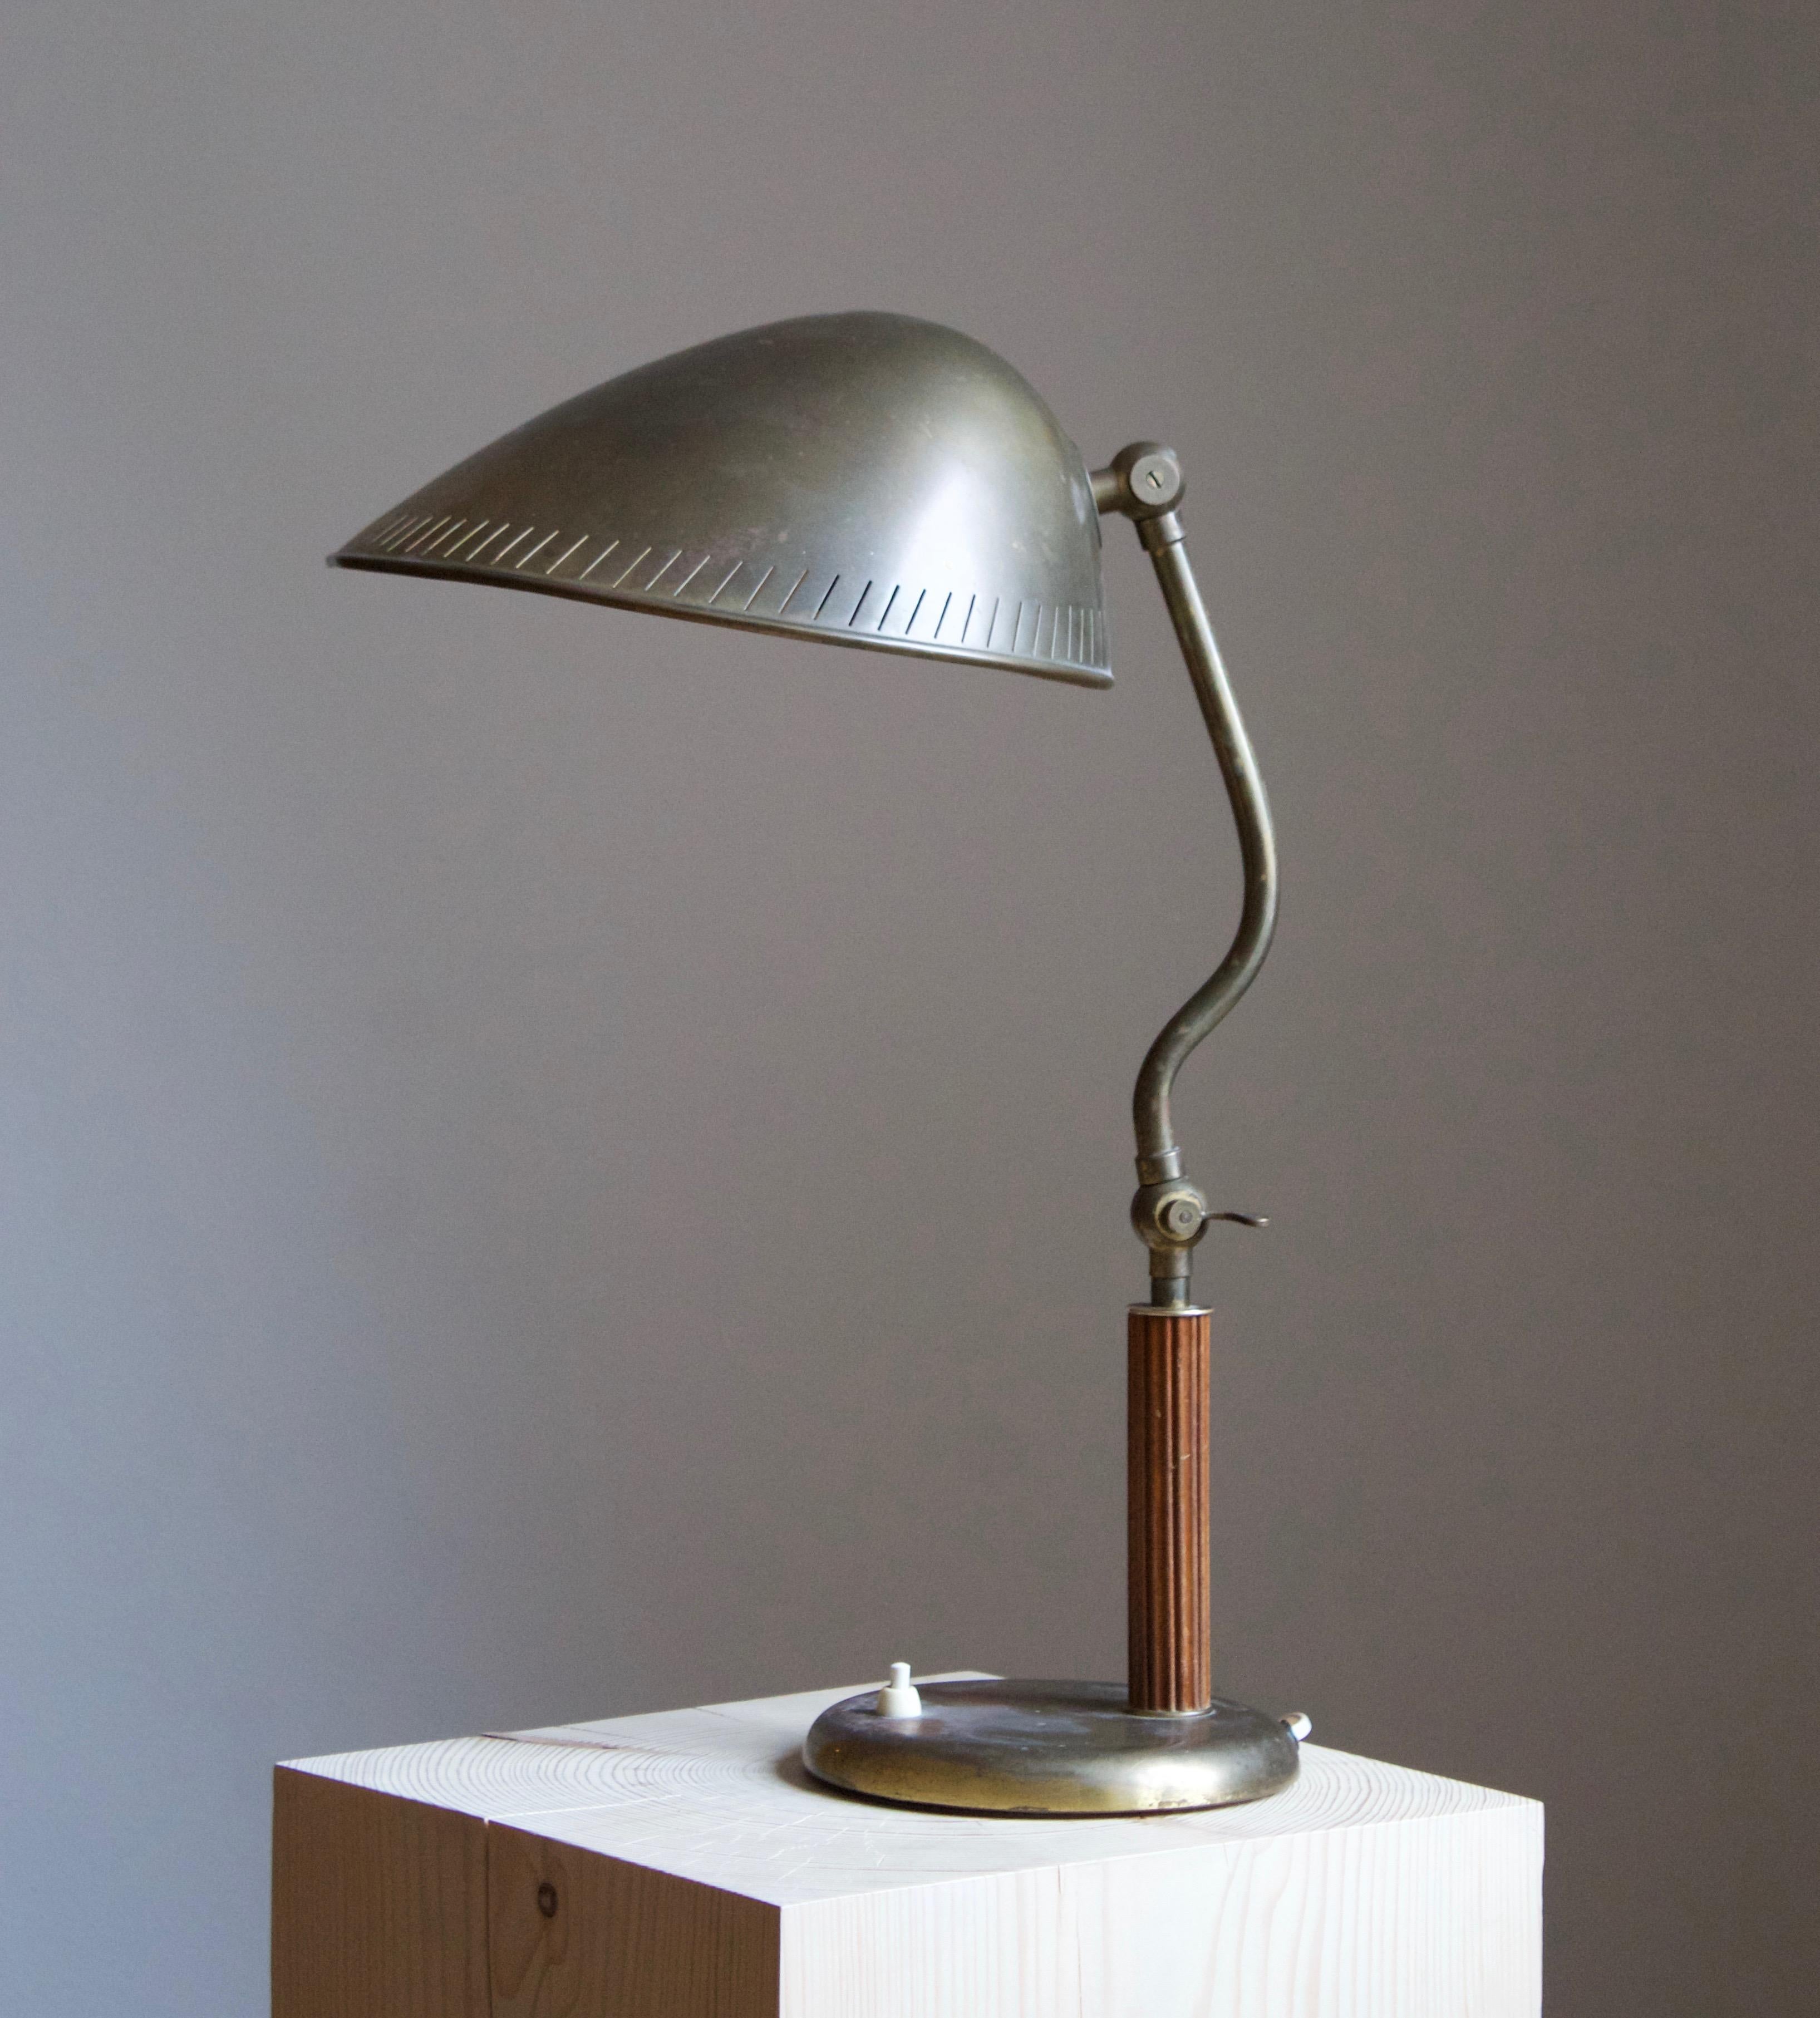 A functionalist adjustable table lamp / desk light. Design attributed to Carl-Axel Acking. Likely produced by Böhlmarks. Features a base and an organic shade in brass, rod in carved and stained elm.

 